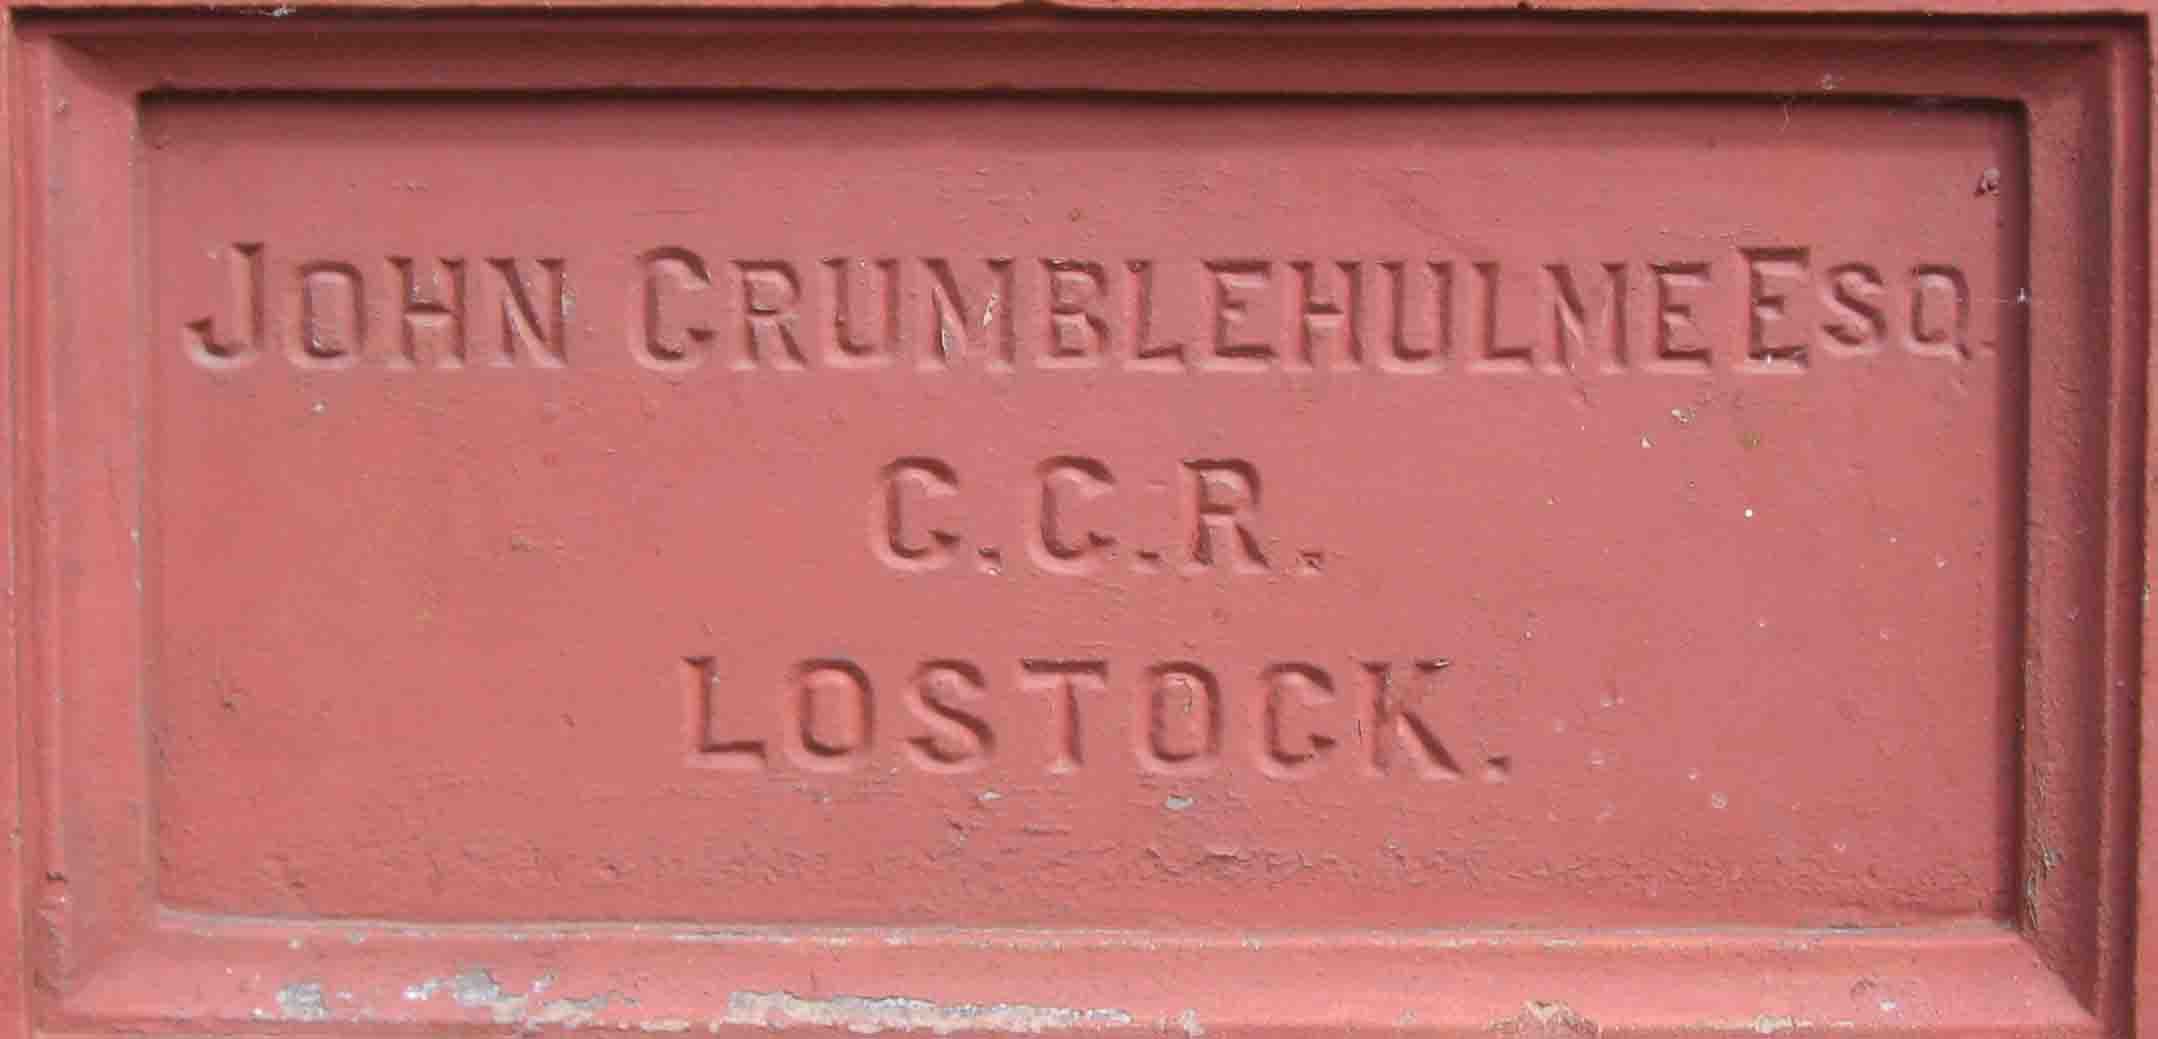 One of the chapel plaques. John Crumblehulme was from a family of Bolton iron founders. He baptised  a number of children at Atherton from 1890 on. Photo by Peter Wood, July 2005